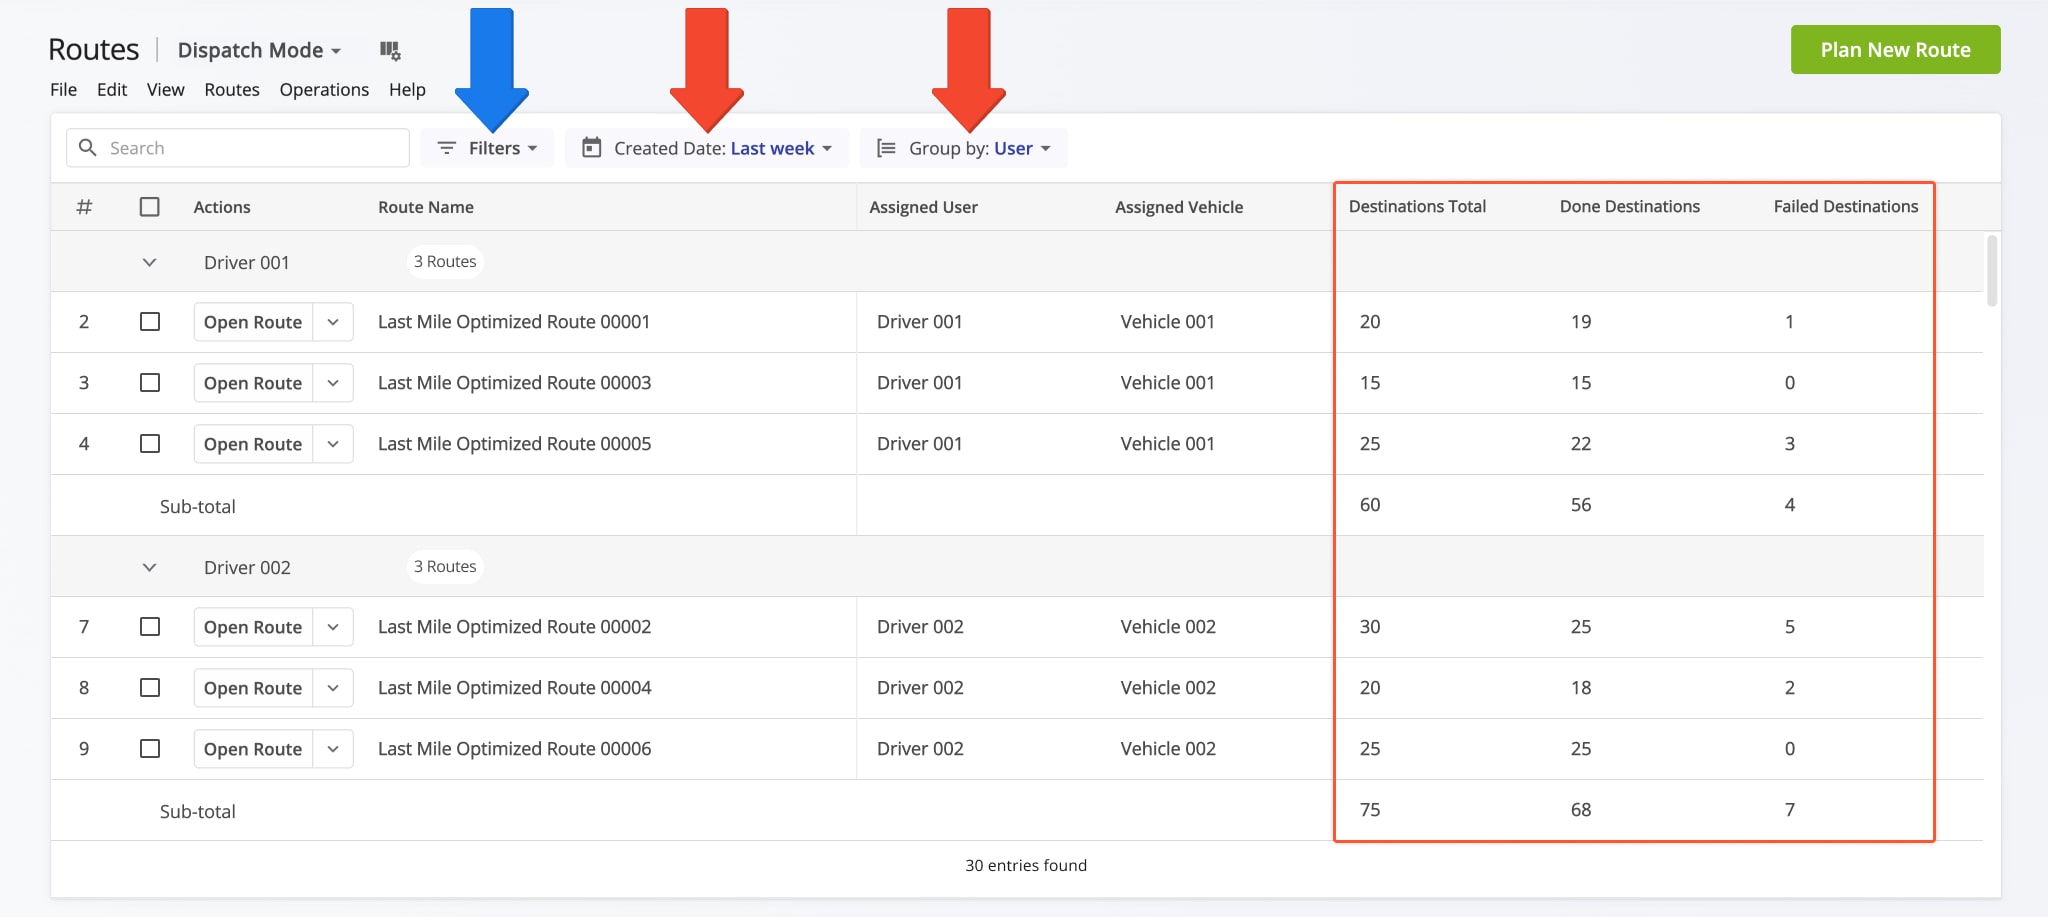 You can track driver performance metrics on the Routes List by filtering routes, grouping routes by driver, and enabling driver performance data columns.